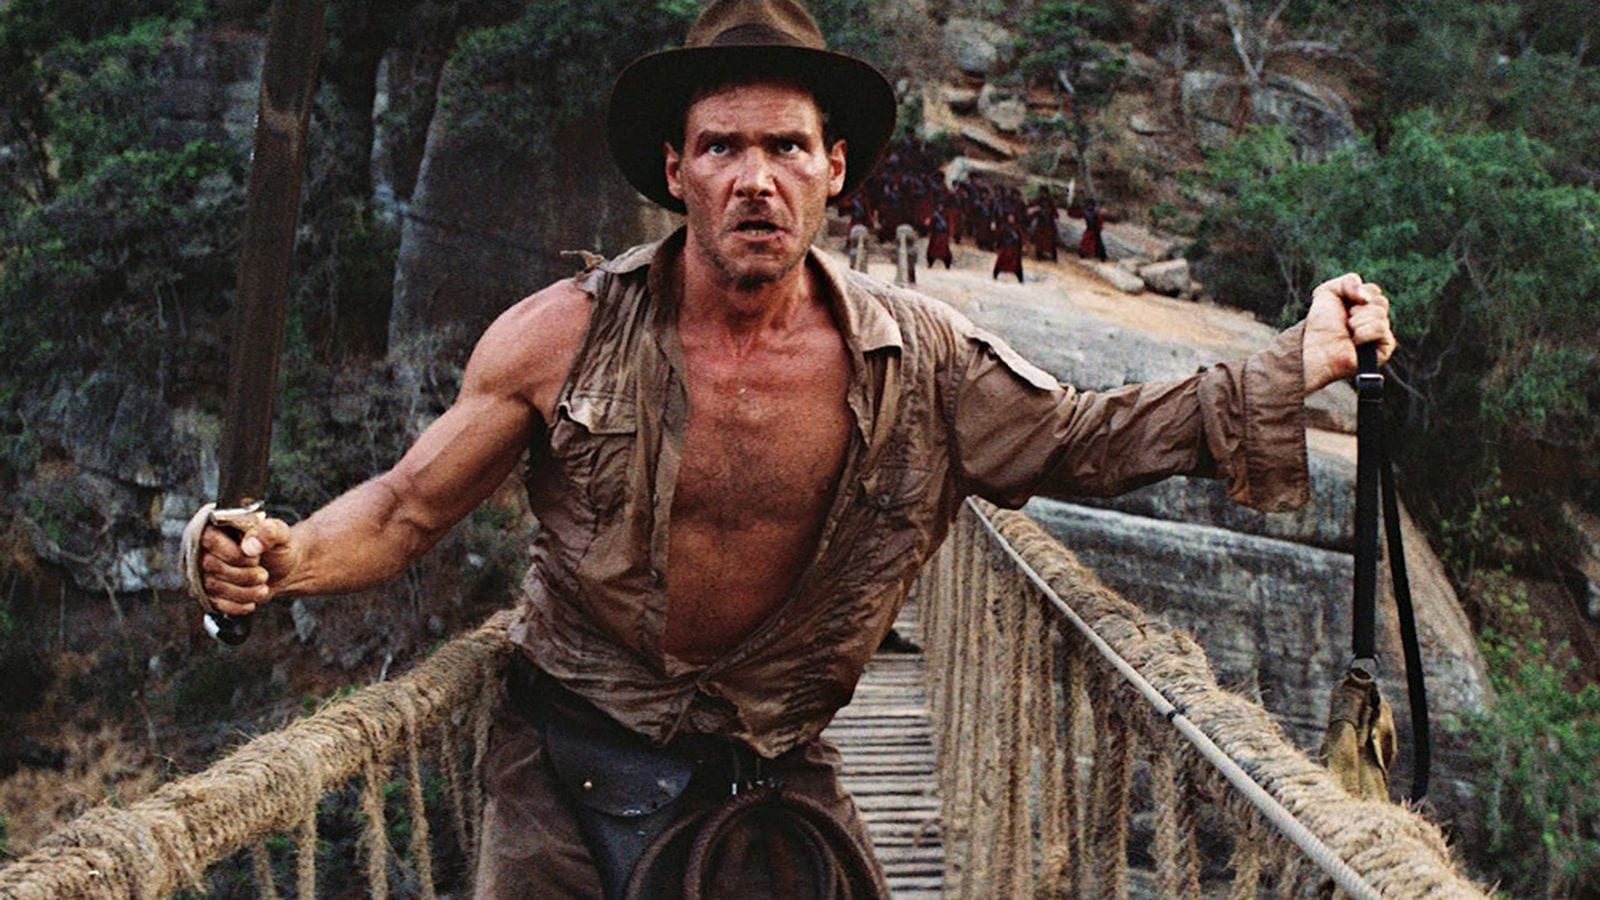 First Indiana Jones 5 Set Pics Revealed - Geeks + Gamers